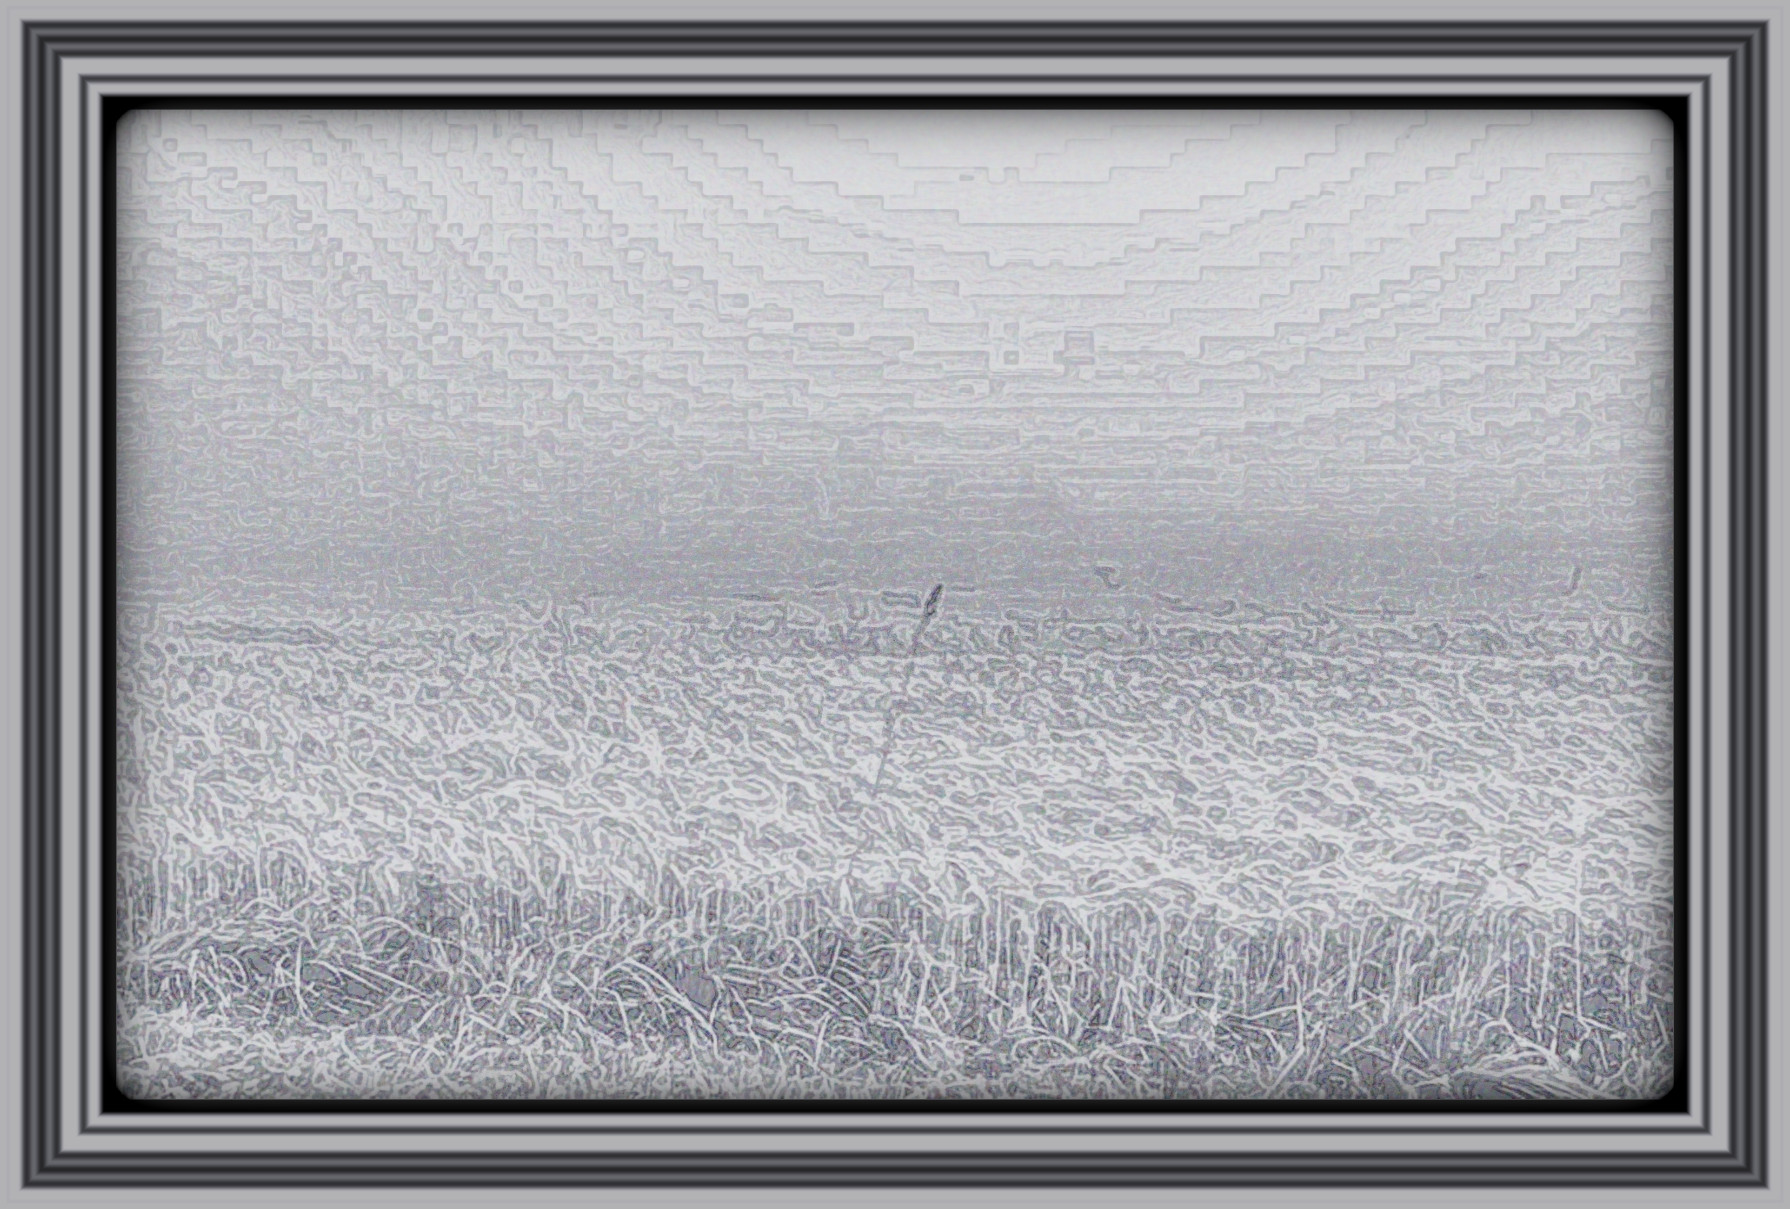 2024-03-27 09-42-15 grey_field__stock_by_ravenslane_dh4gvpe-414w-2x with Lines Art effect, preset=3000,35.0,3.5,Pen Drawing,0,[200,201,208],3,1.jpg